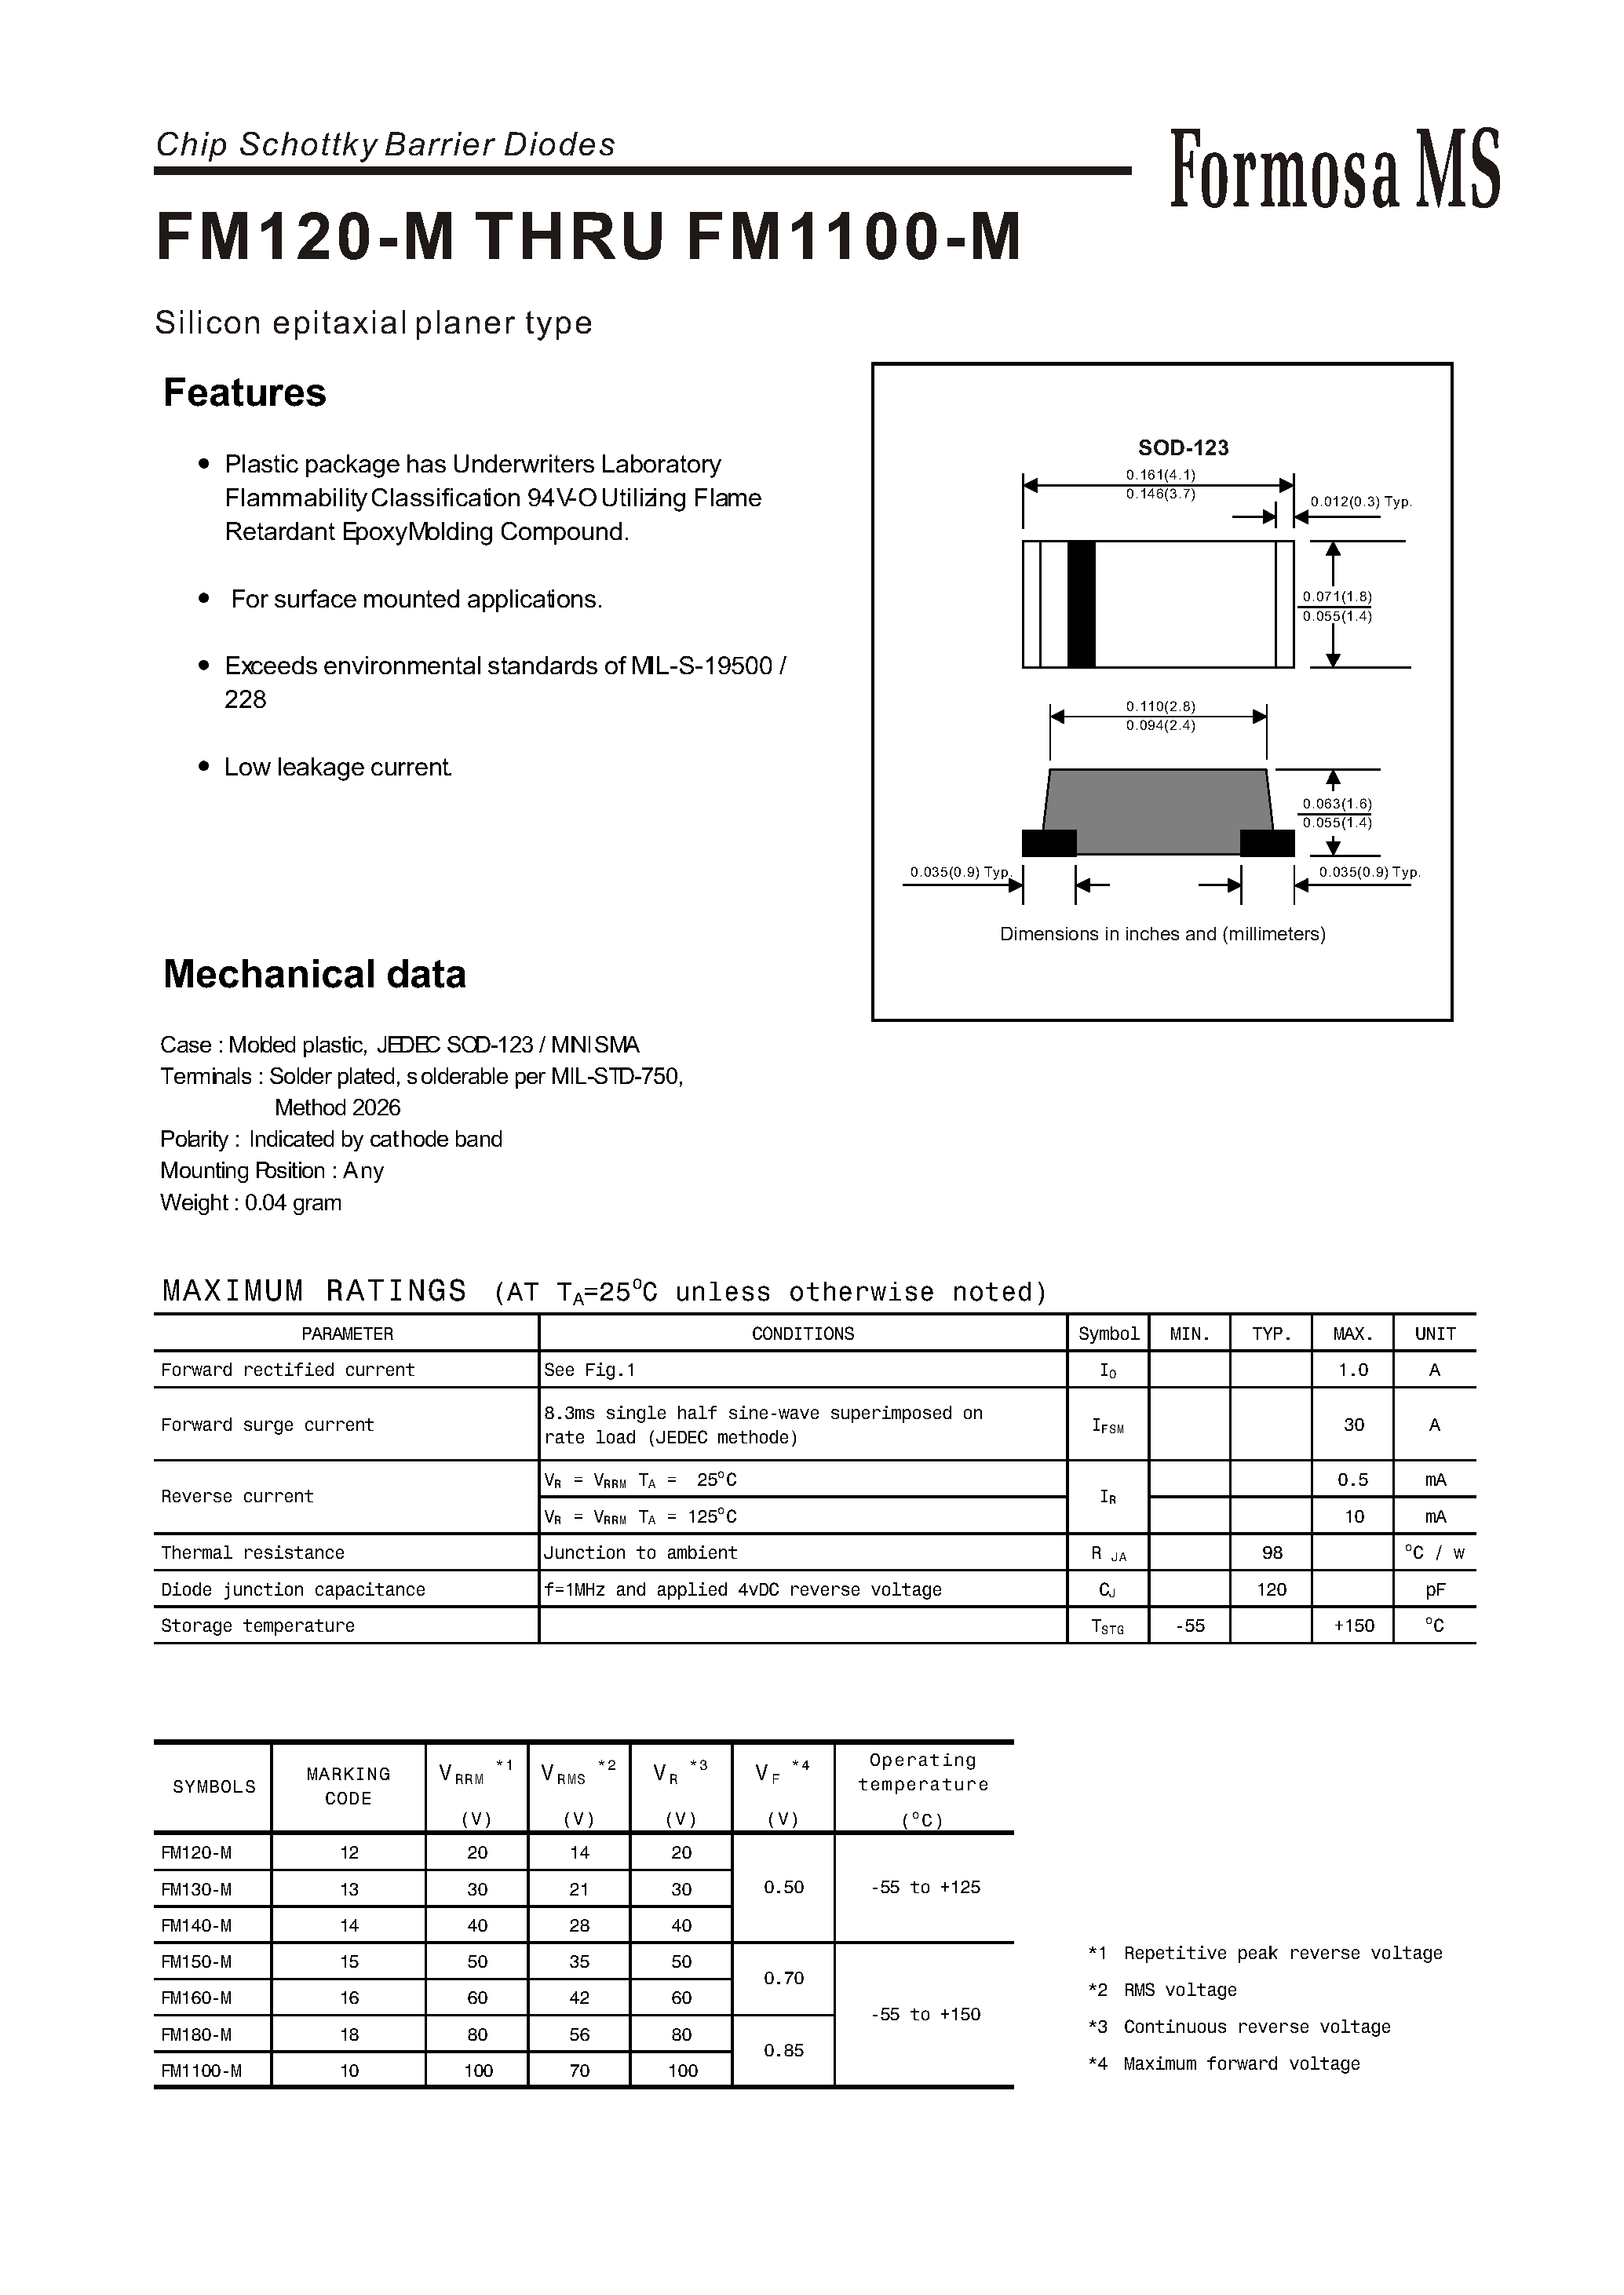 Datasheet FM120-M - Silicon epitaxial planer type page 1